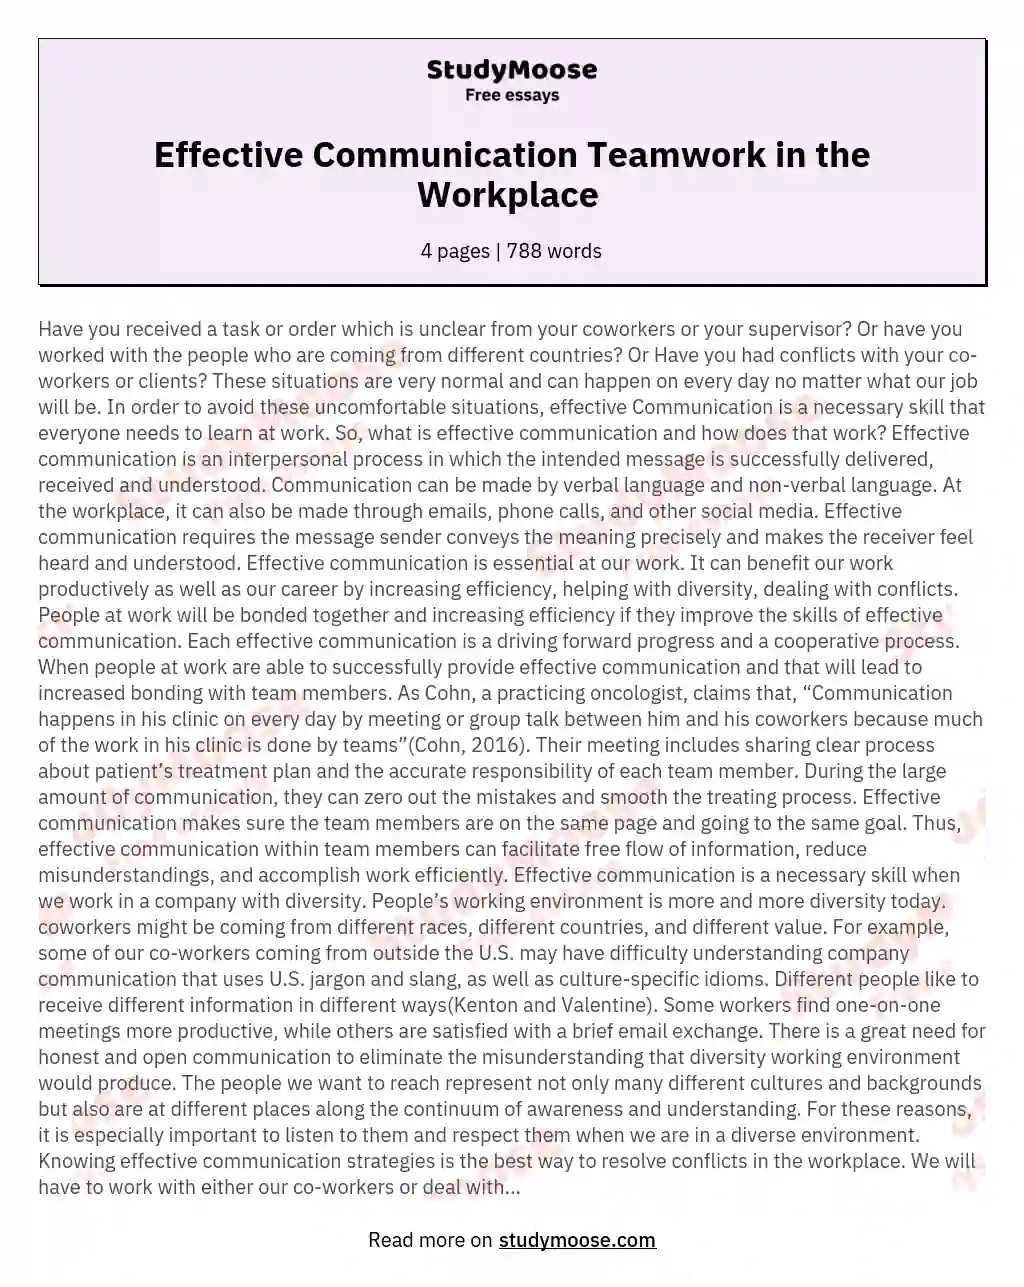 Effective Communication Teamwork in the Workplace  essay